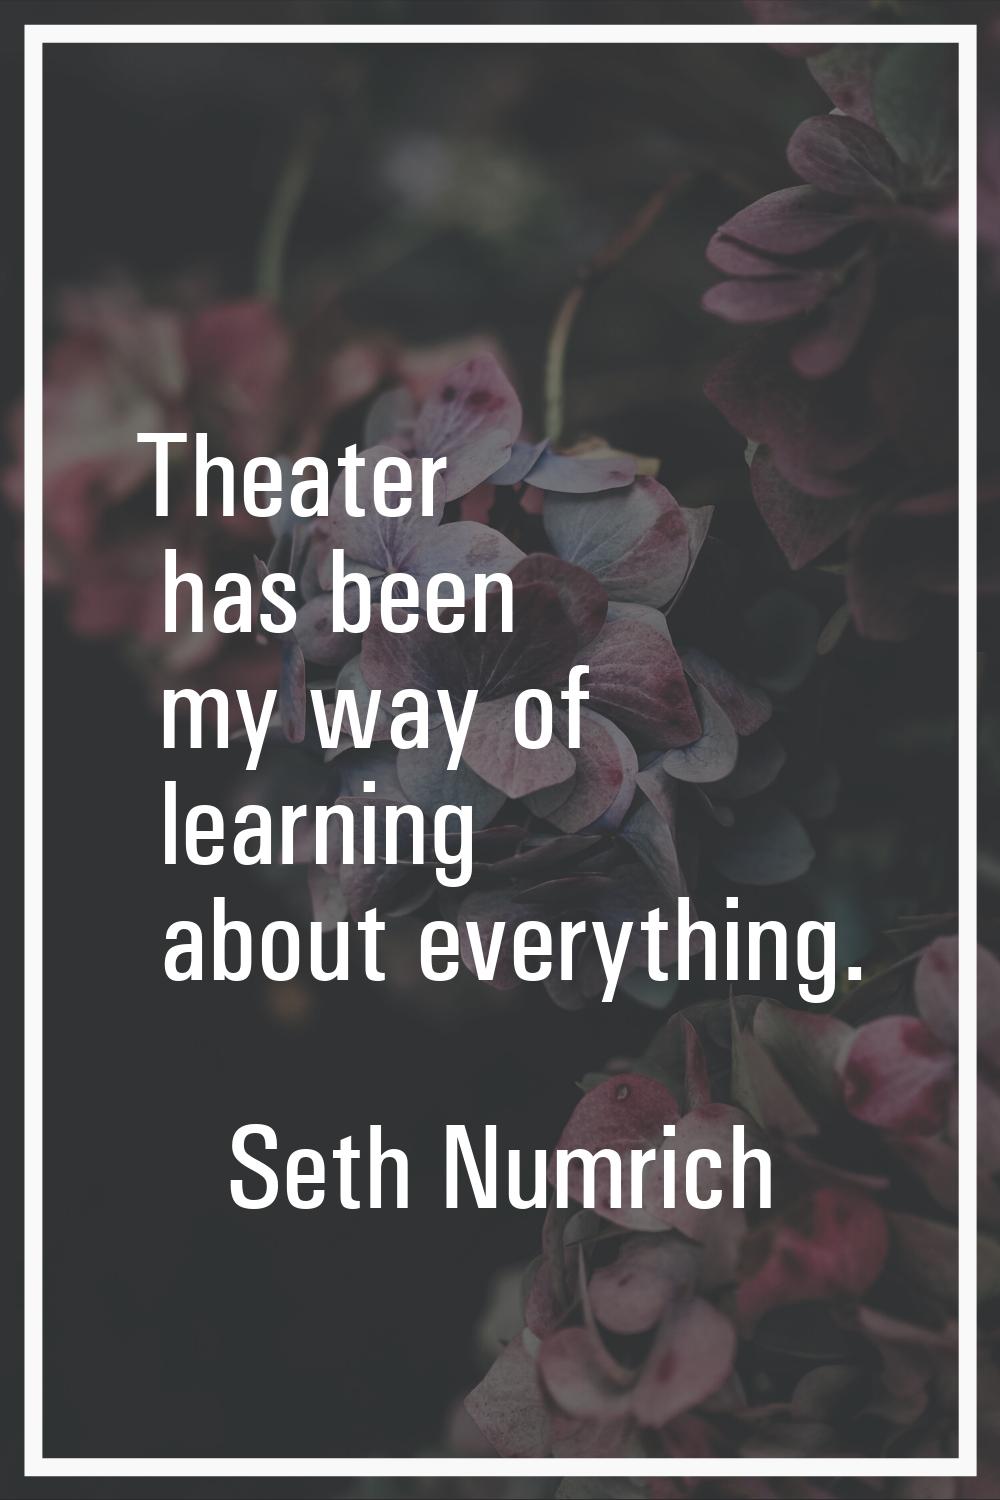 Theater has been my way of learning about everything.